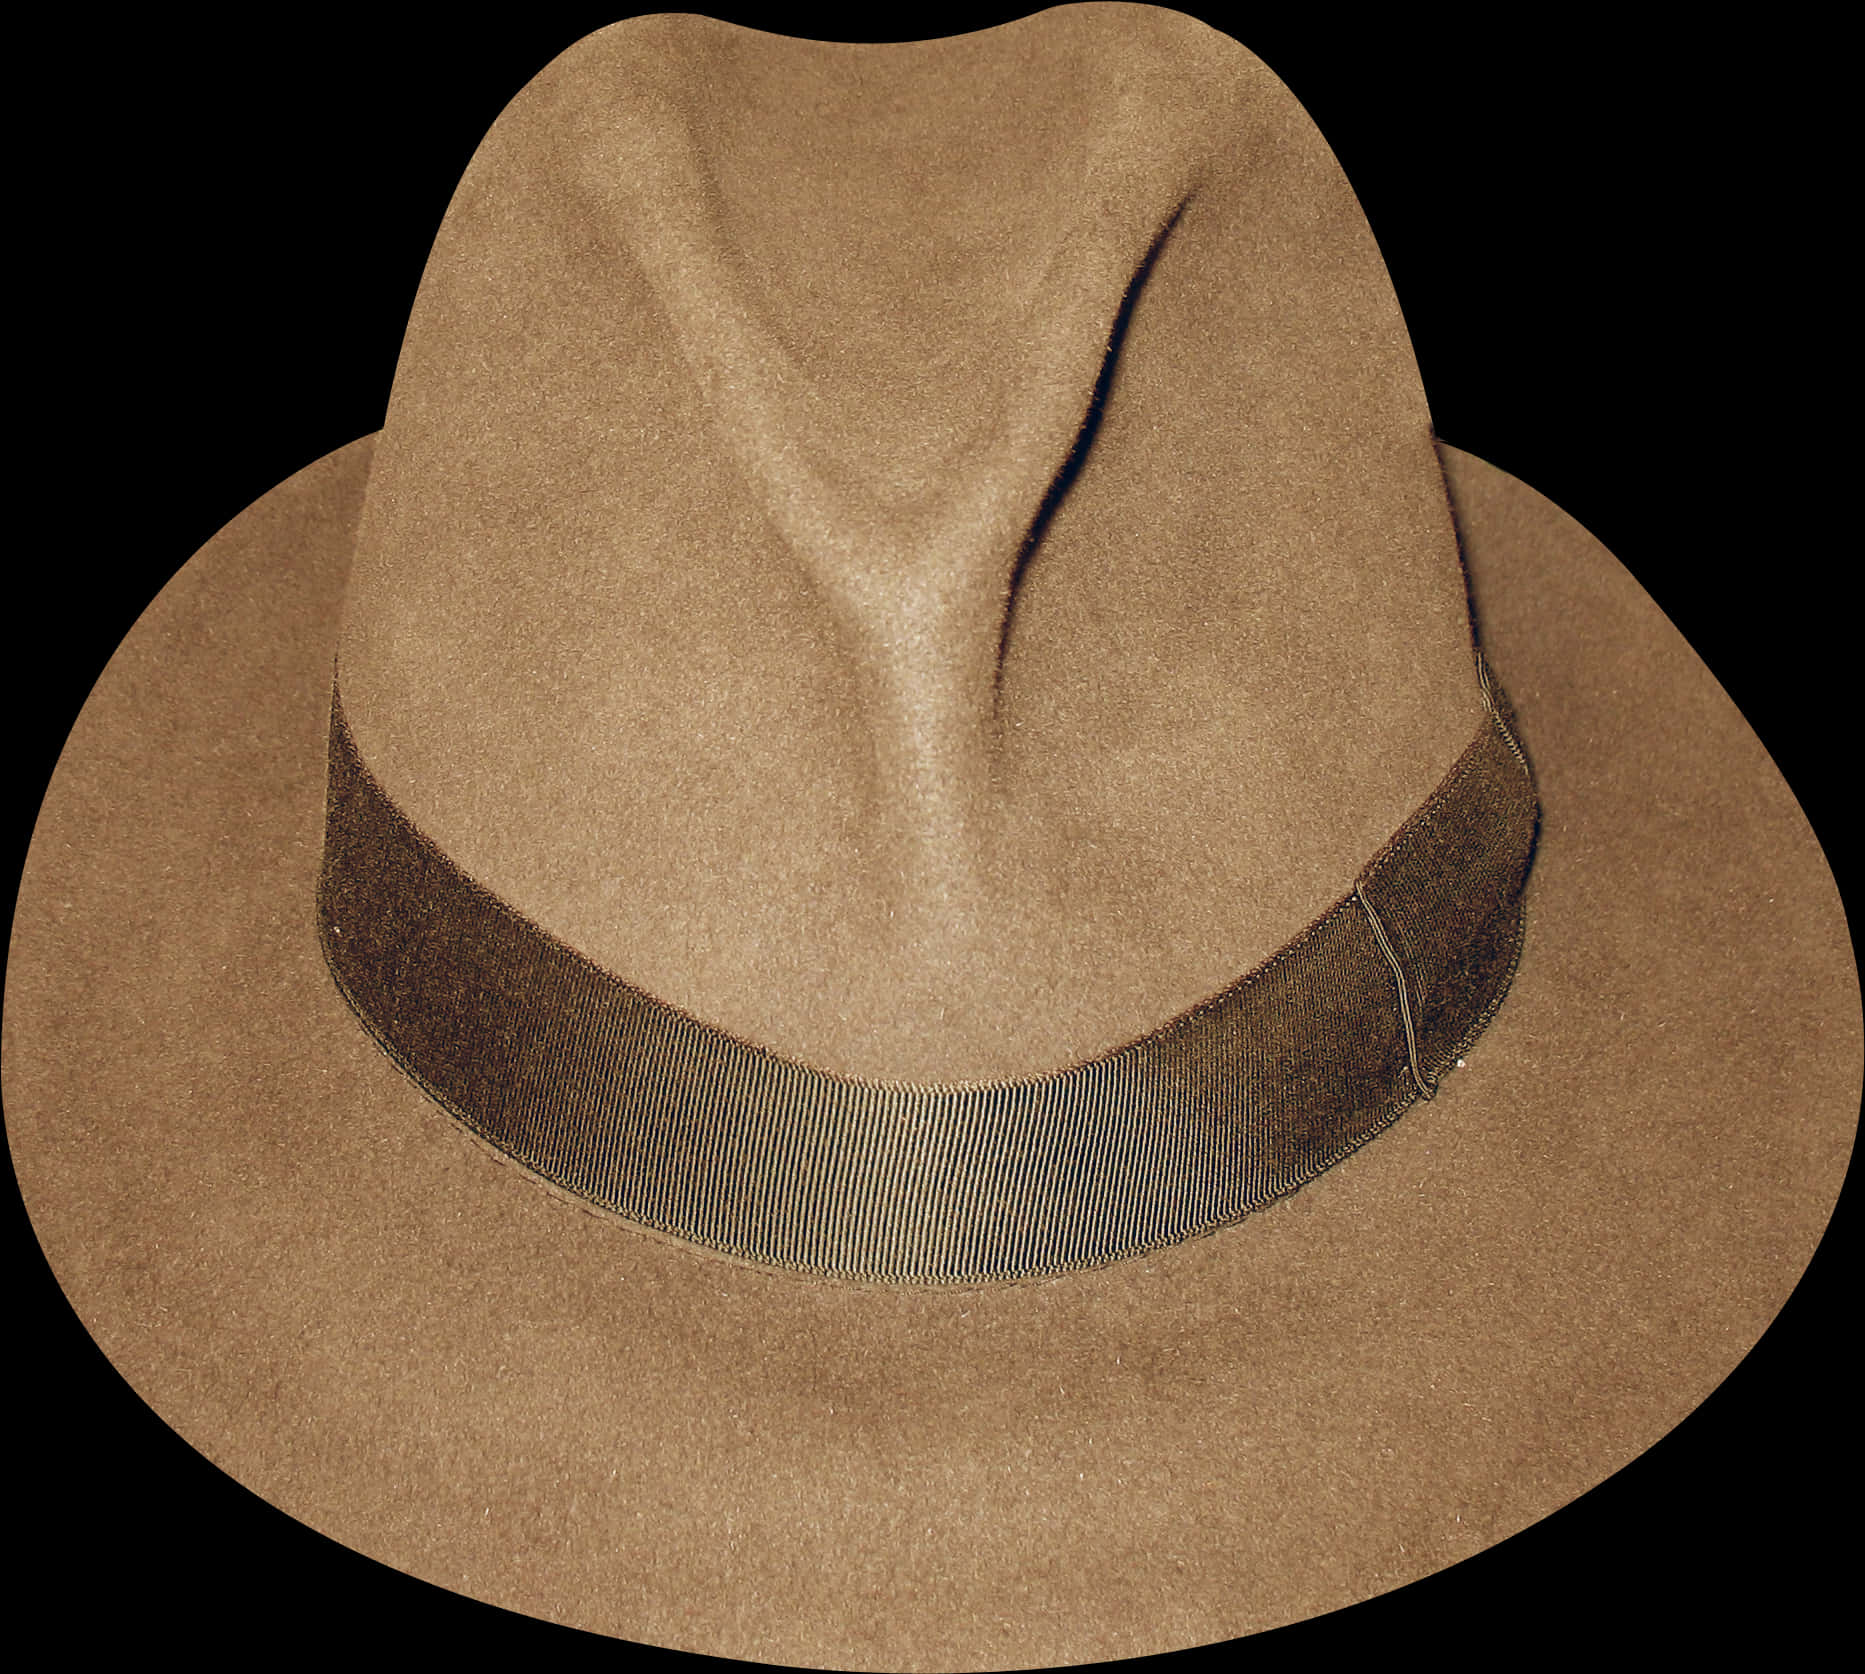 A Brown Hat With A Black Background